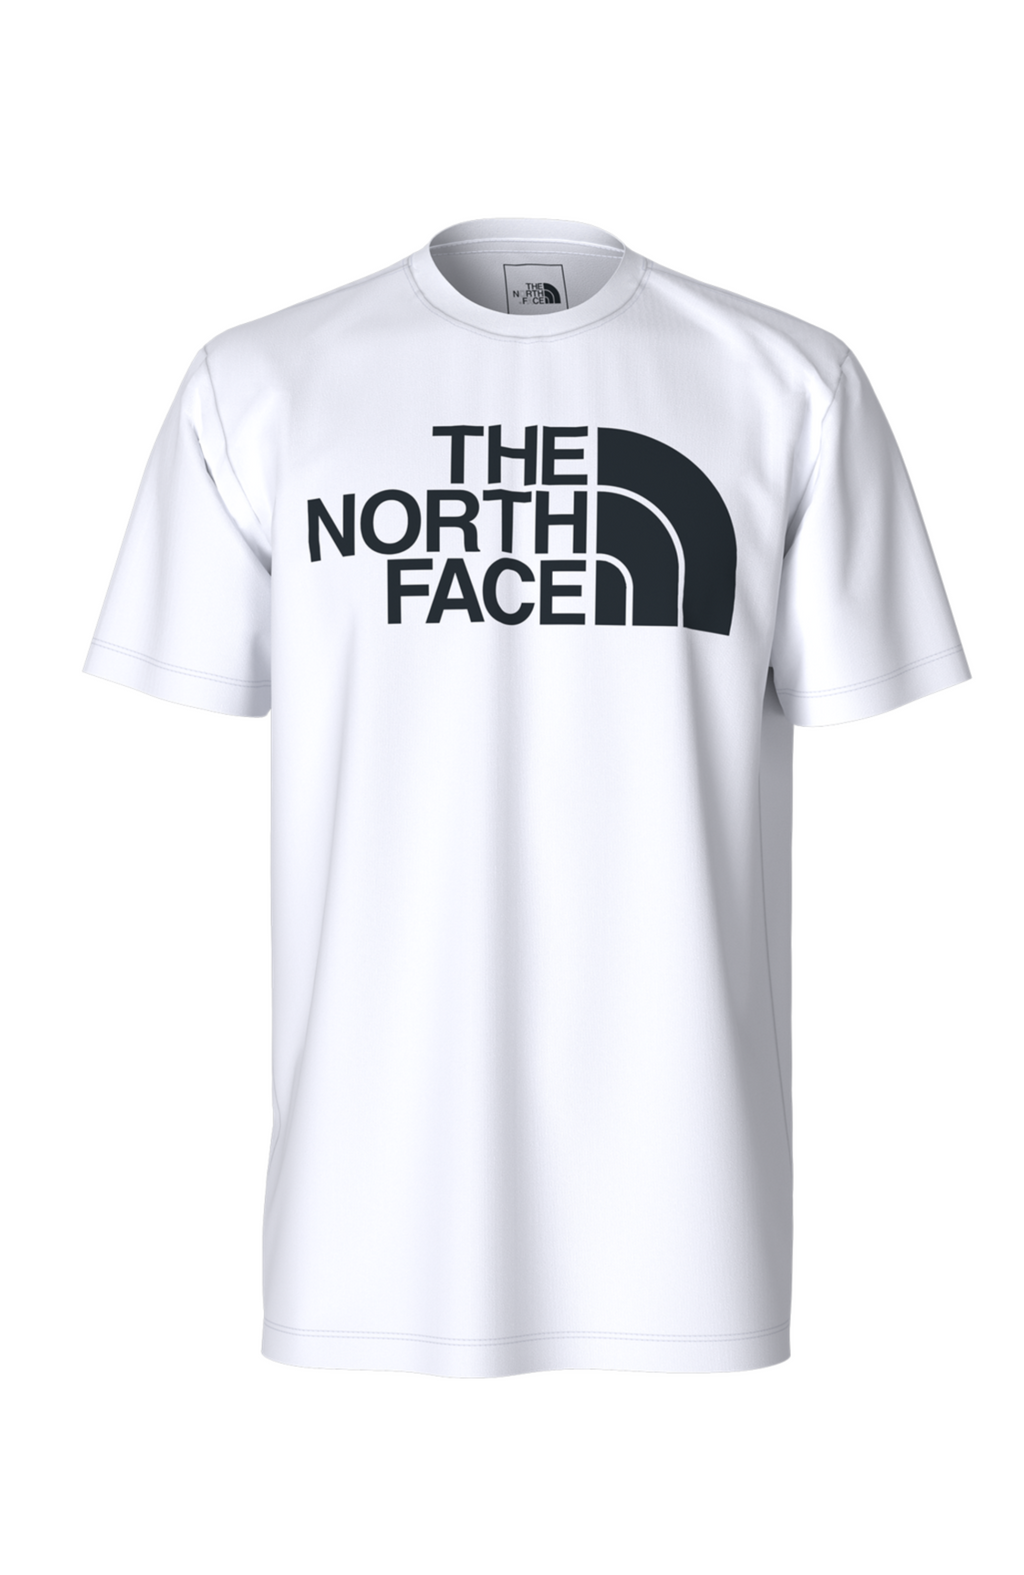 The North Face - Men's Short Sleeve Half Dome Tee